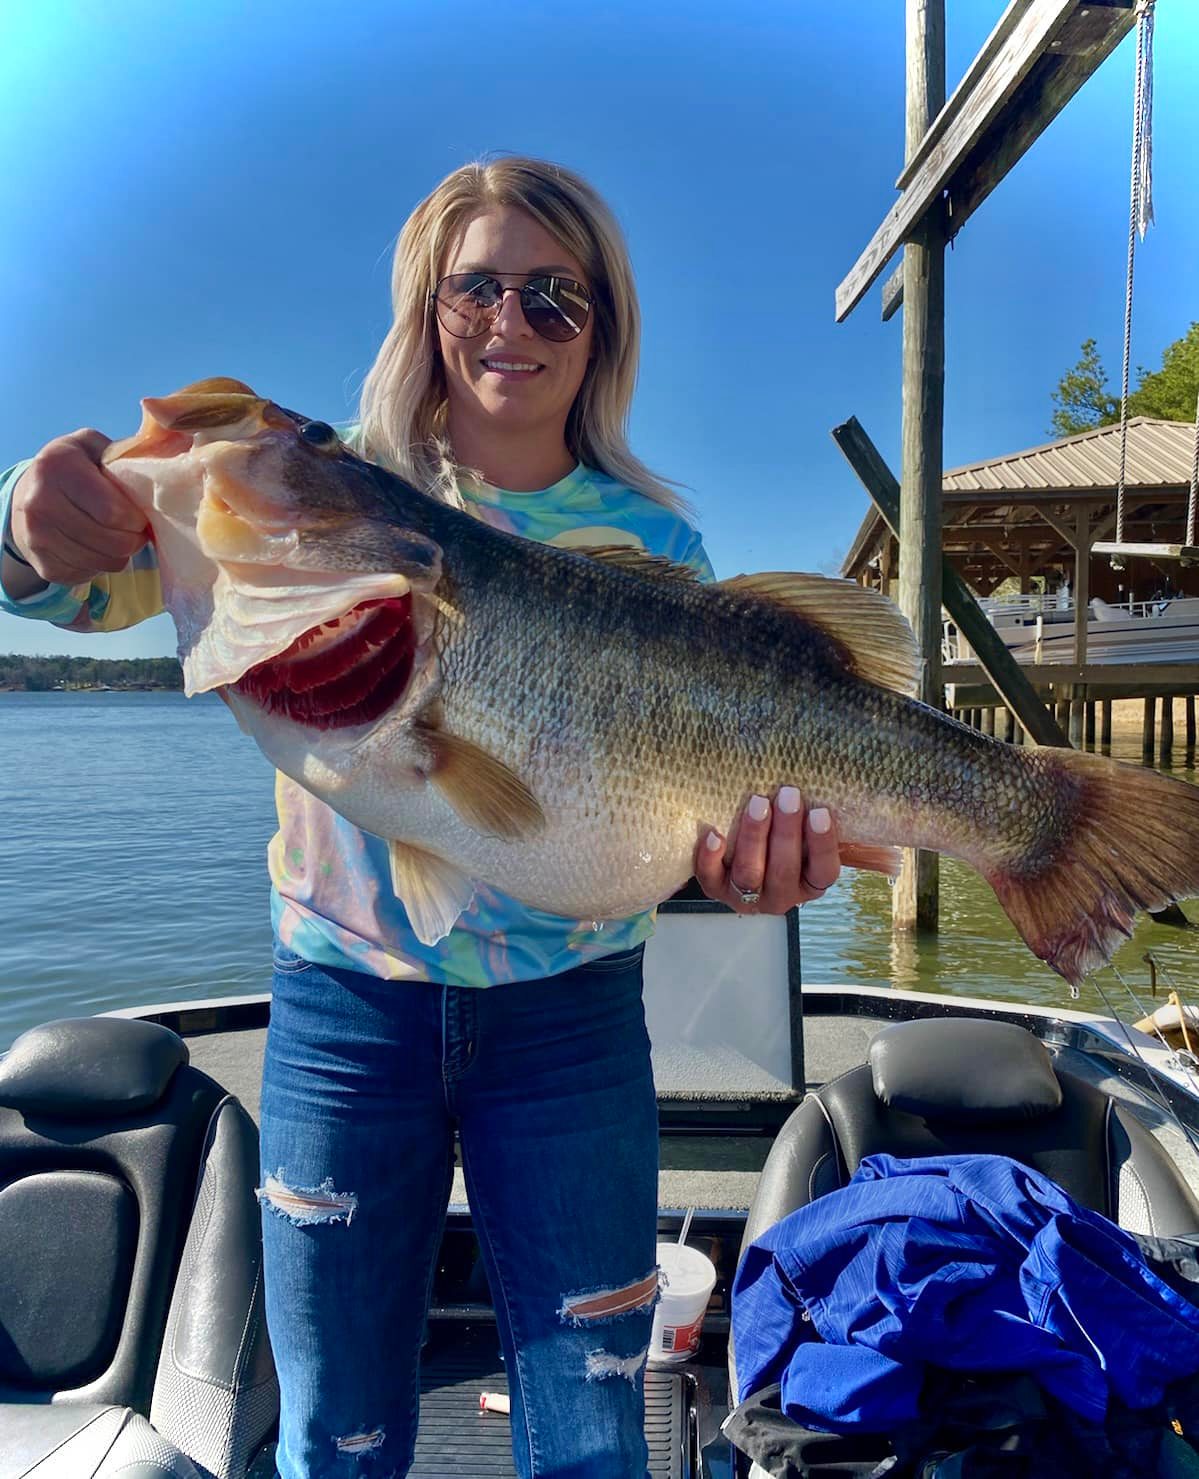 East Texas Woman Lands 13-Pound Lunker